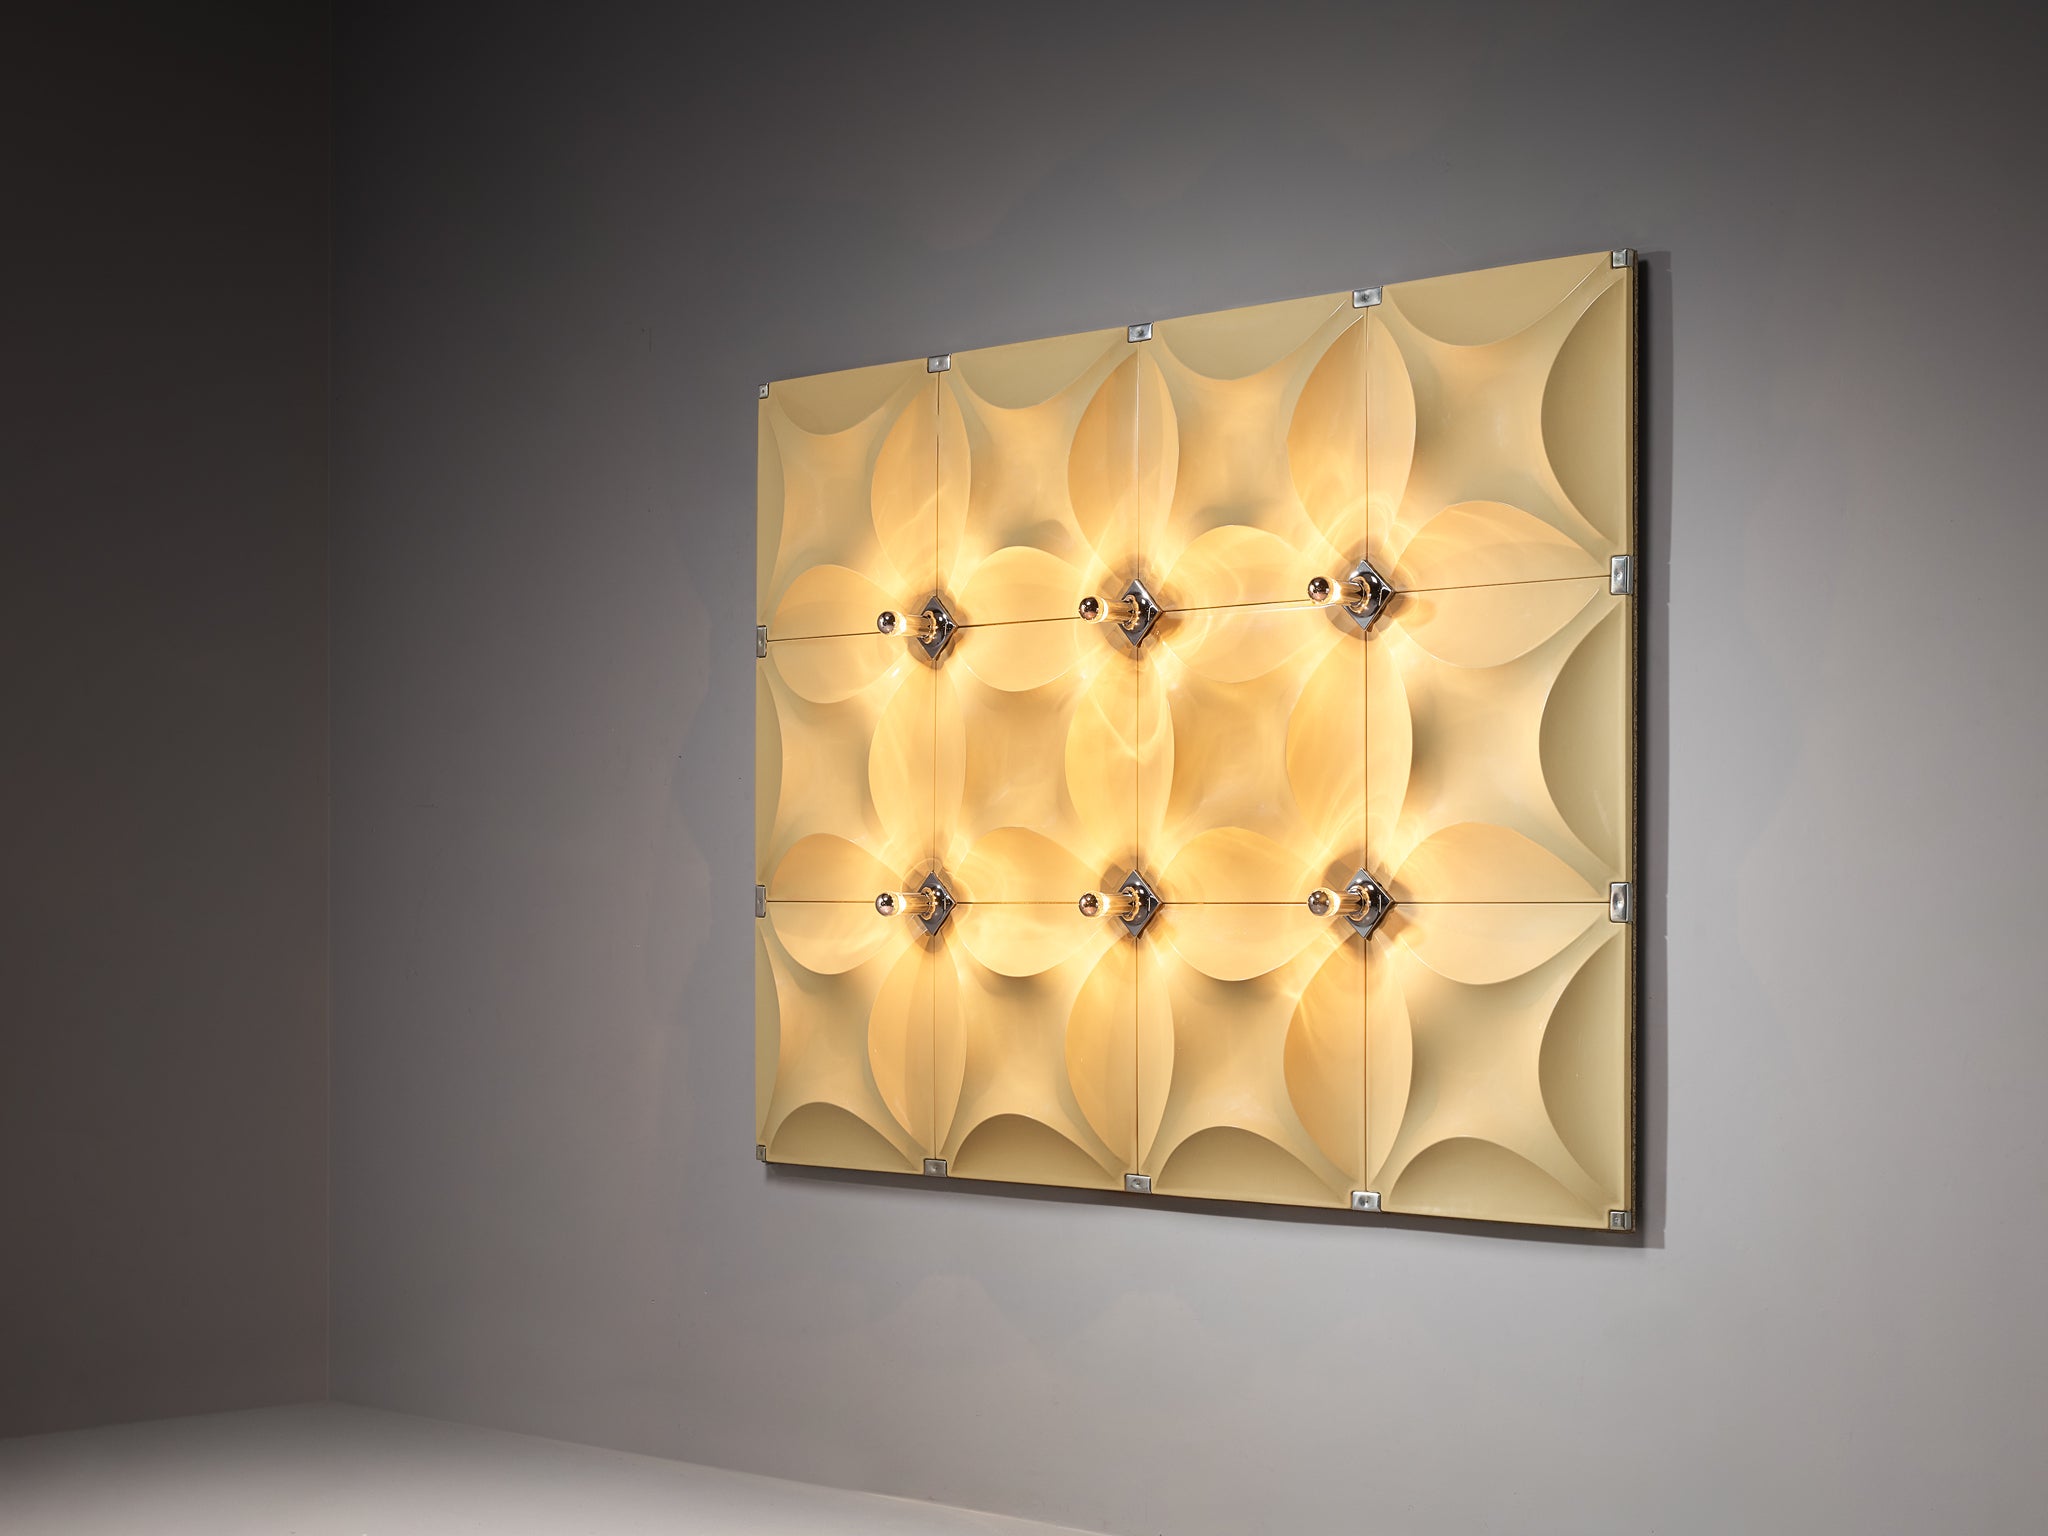 1970s Large Wall Light Sculpture with Organic Shapes in Pastel Yellow